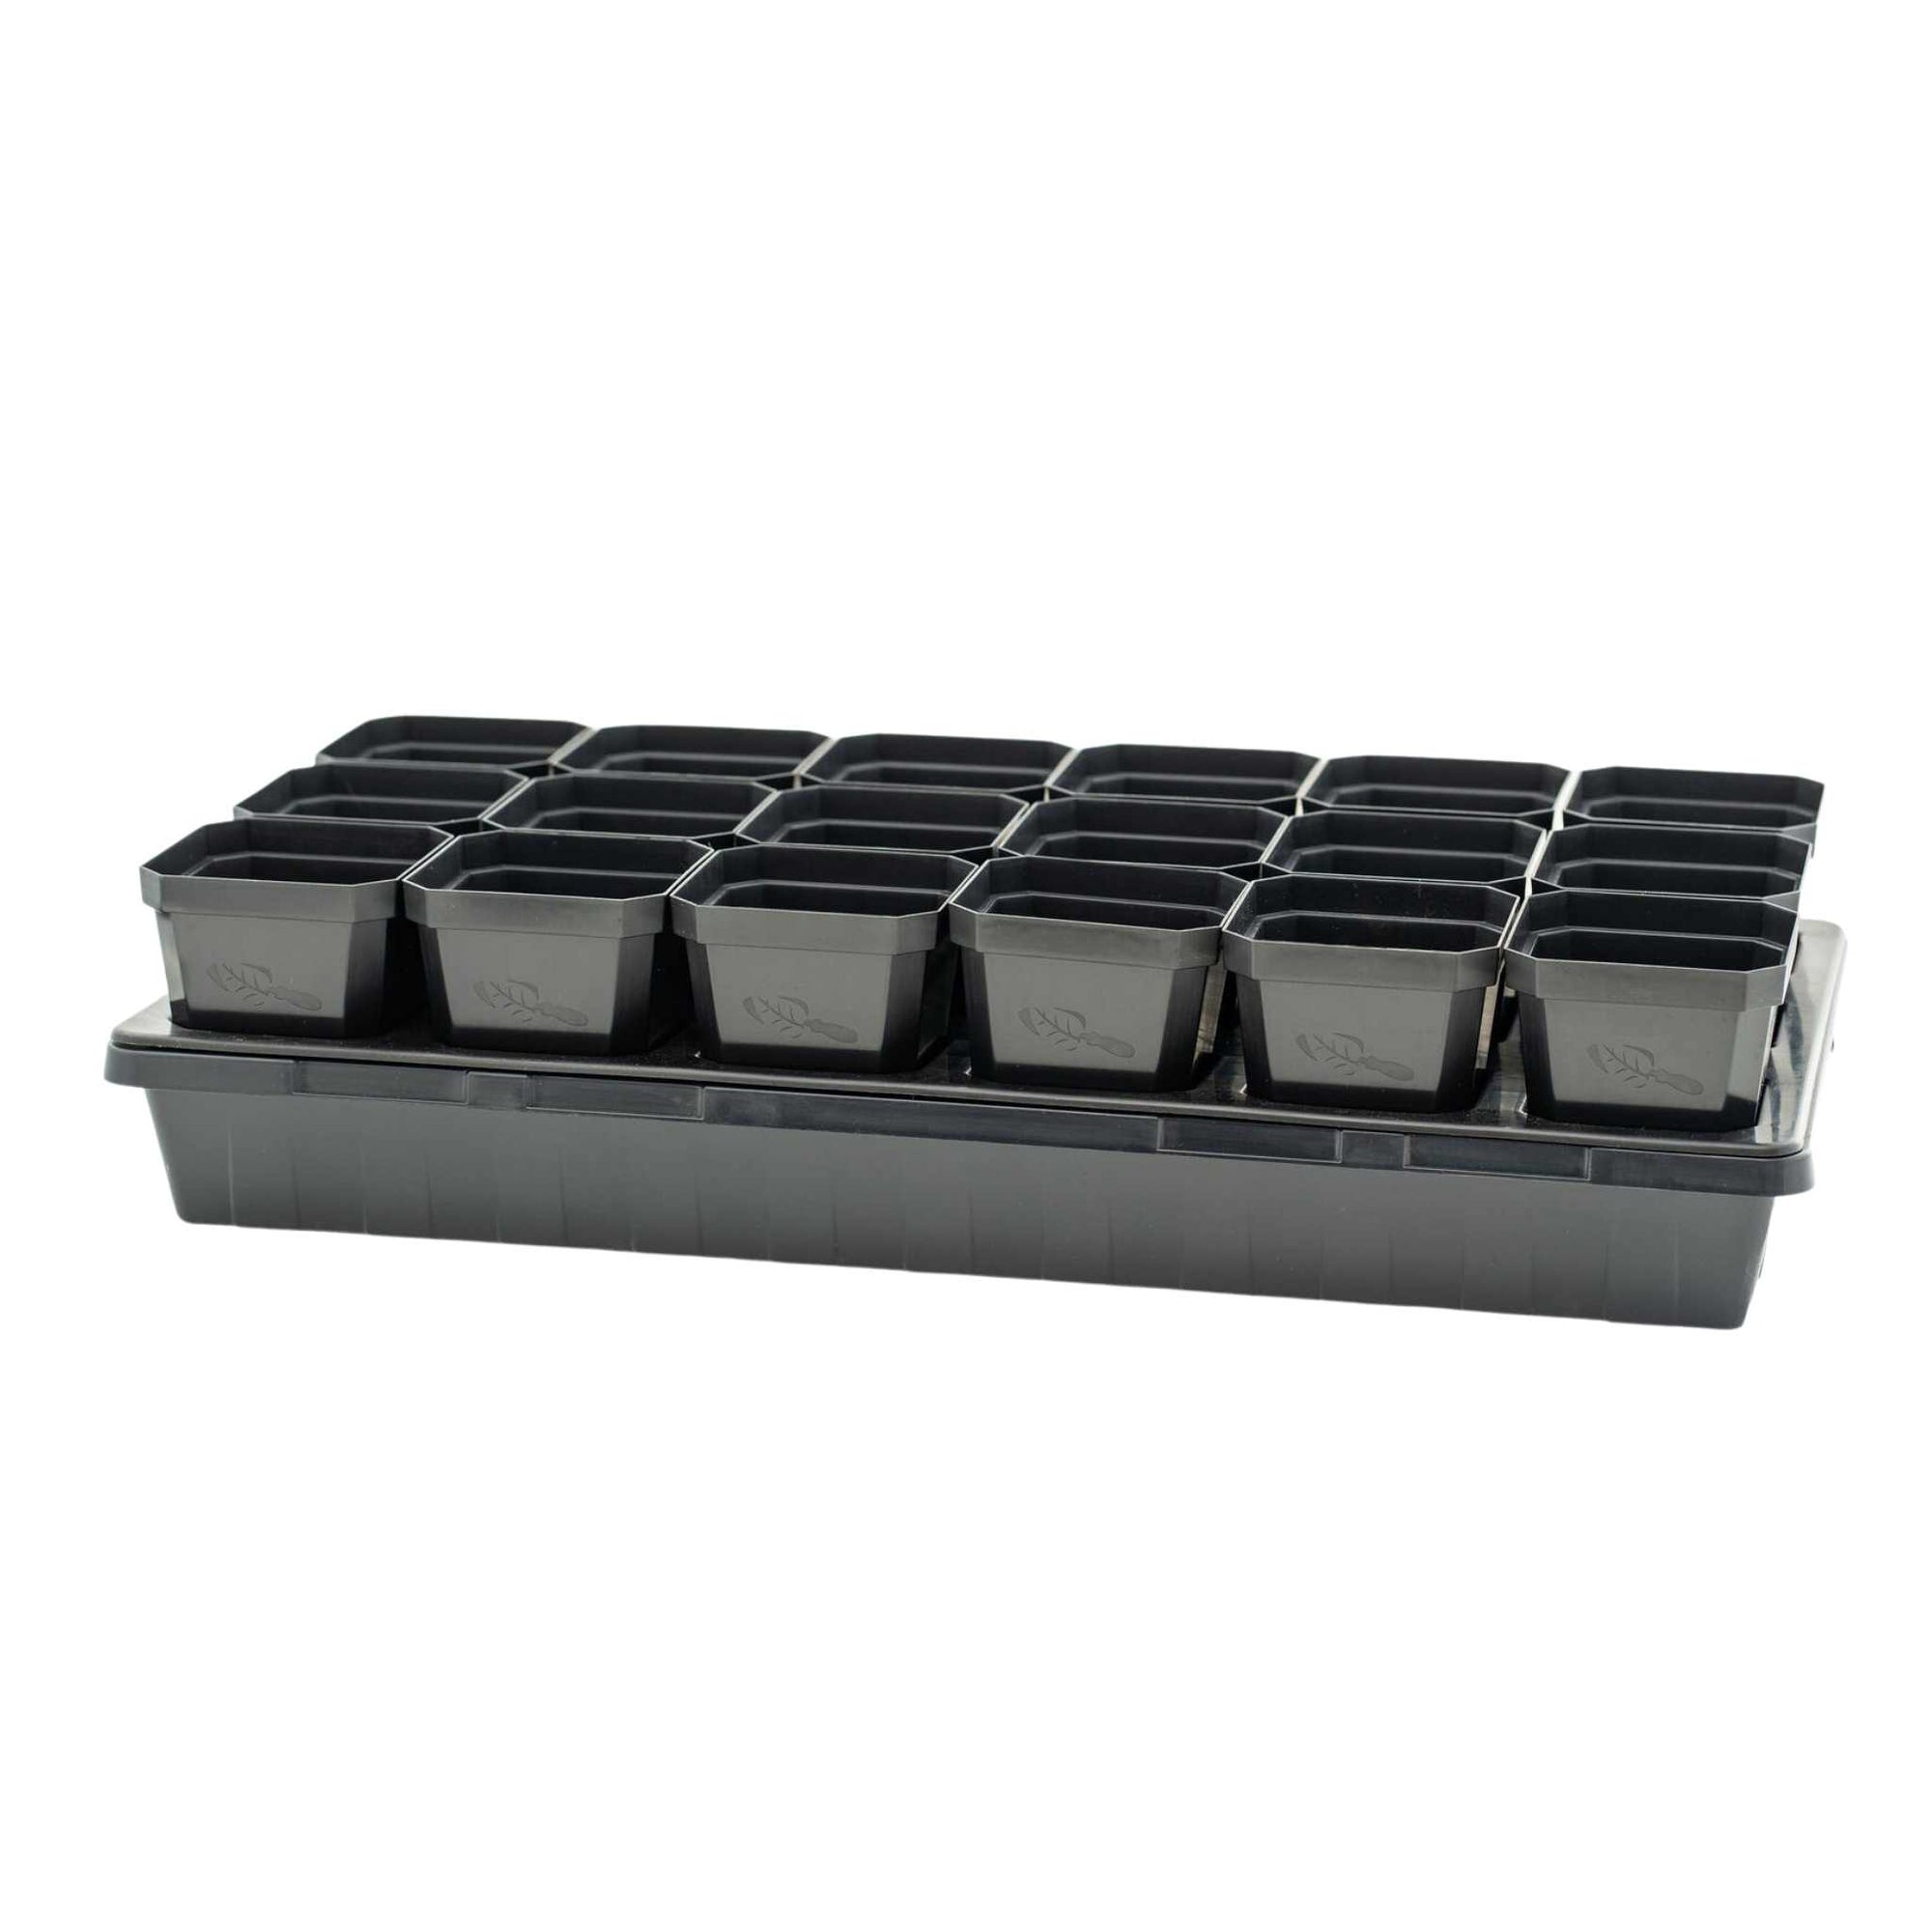 3 in pots and insert in 1020 black tray